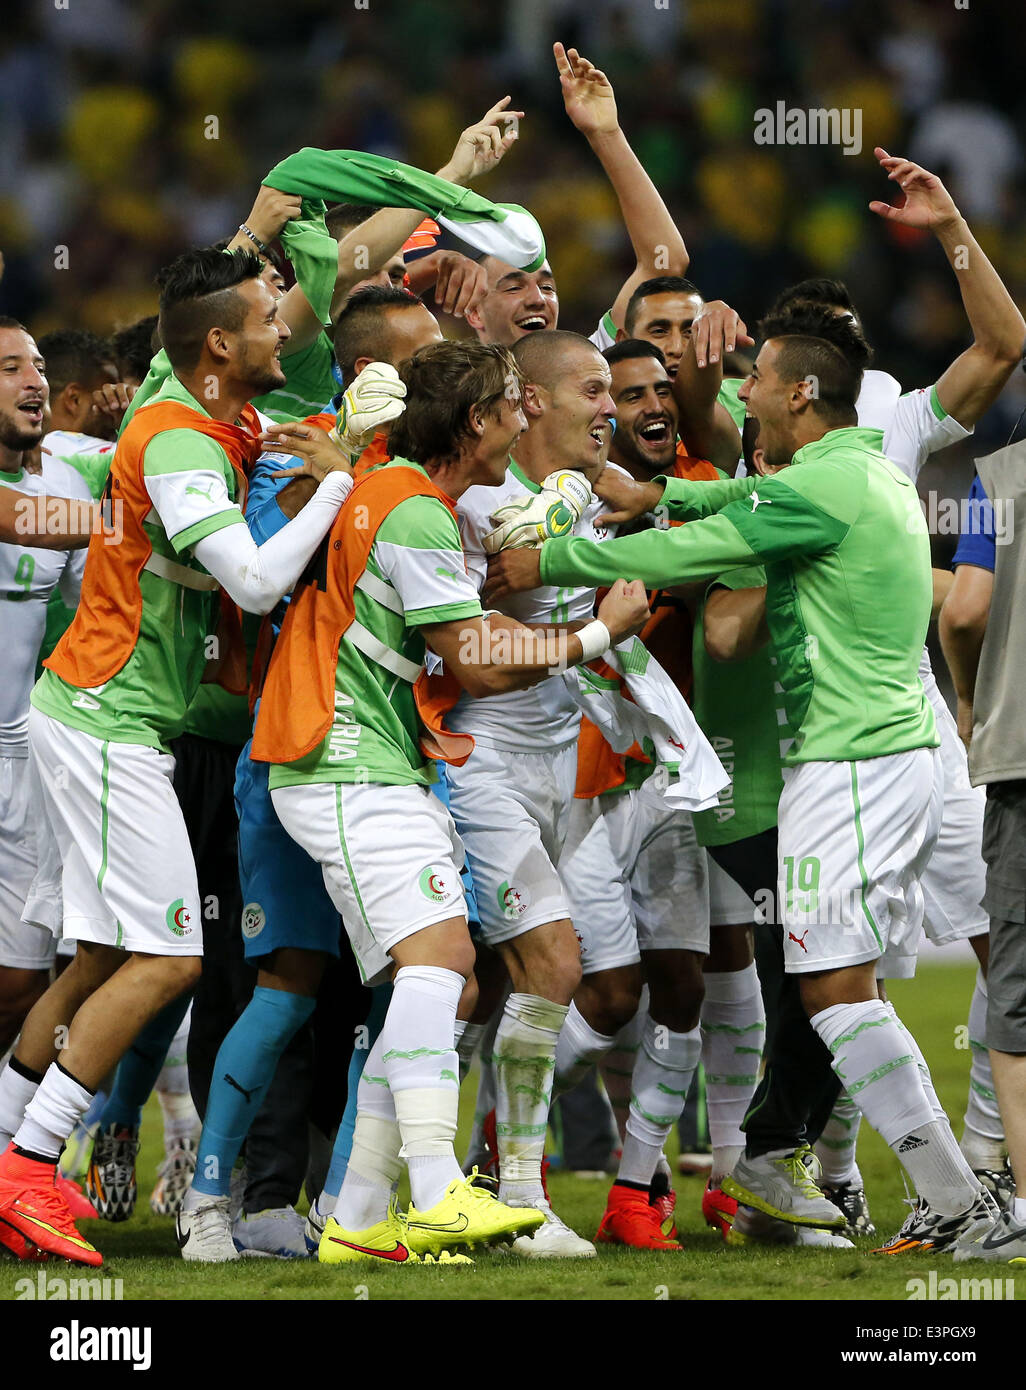 (140626) -- CURITIBA, June 26, 2014 (Xinhua) -- Algeria's players celebrate after a Group H match between Algeria and Russia of 2014 FIFA World Cup at the Arena da Baixada Stadium in Curitiba, Brazil, June 26, 2014. Algeria enters Round of 16 after the Thursday match which ended in a 1-1 draw.(Xinhua/Zhou Lei) Stock Photo